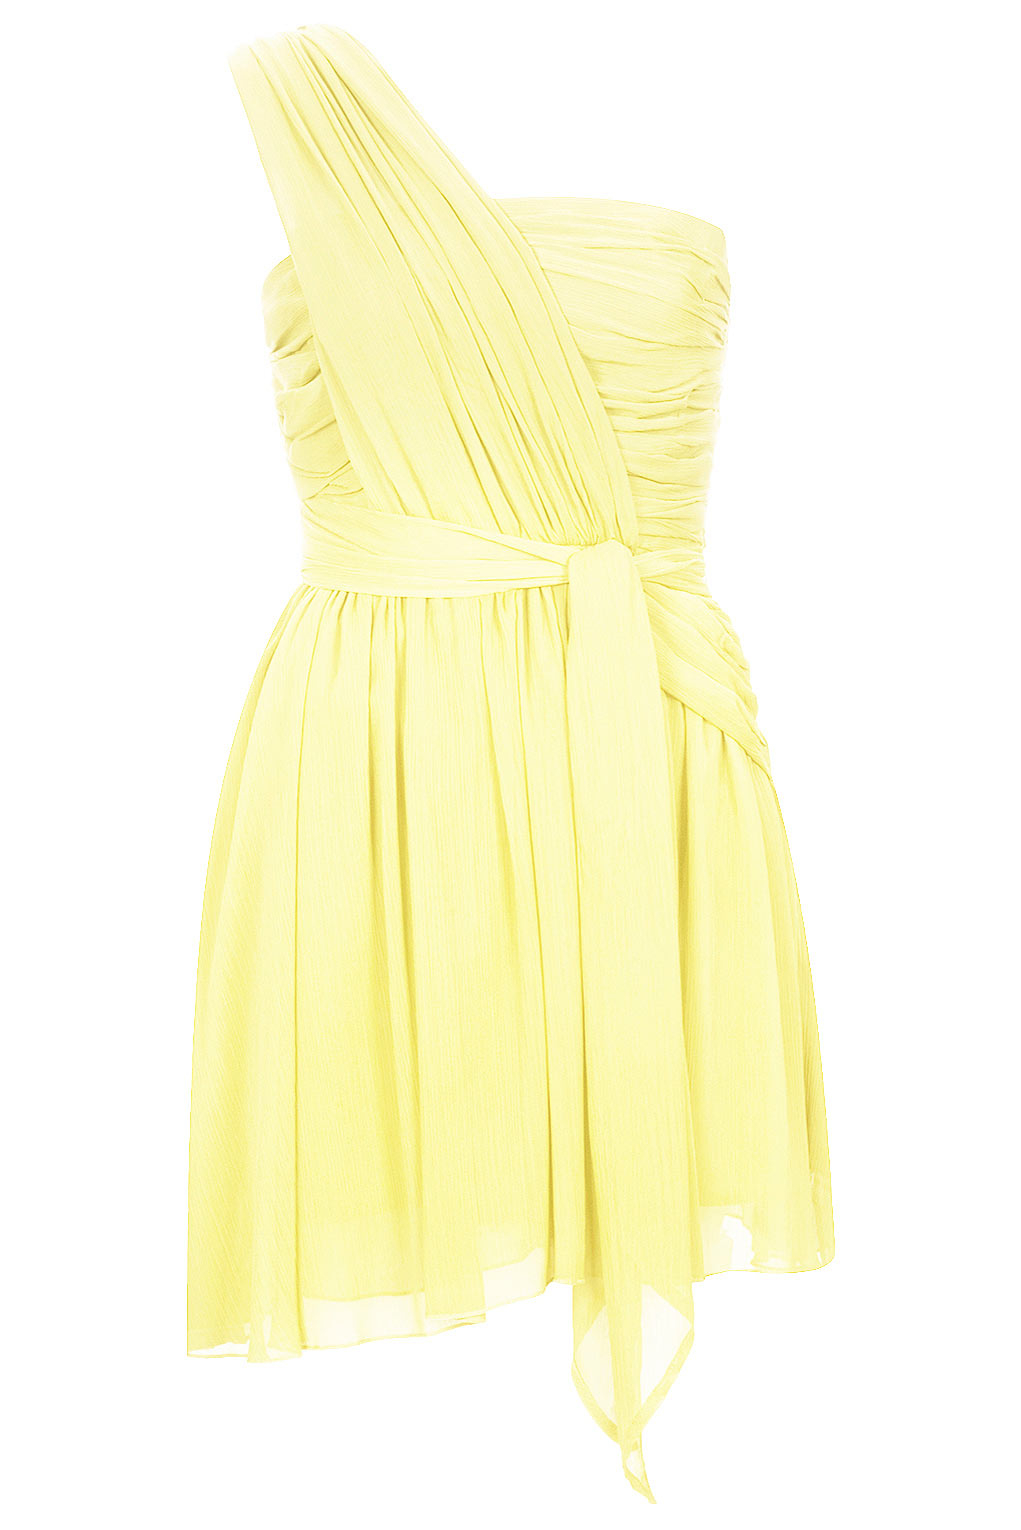 Topshop One Shoulder Chiffon Dress By Kate Moss For in Yellow